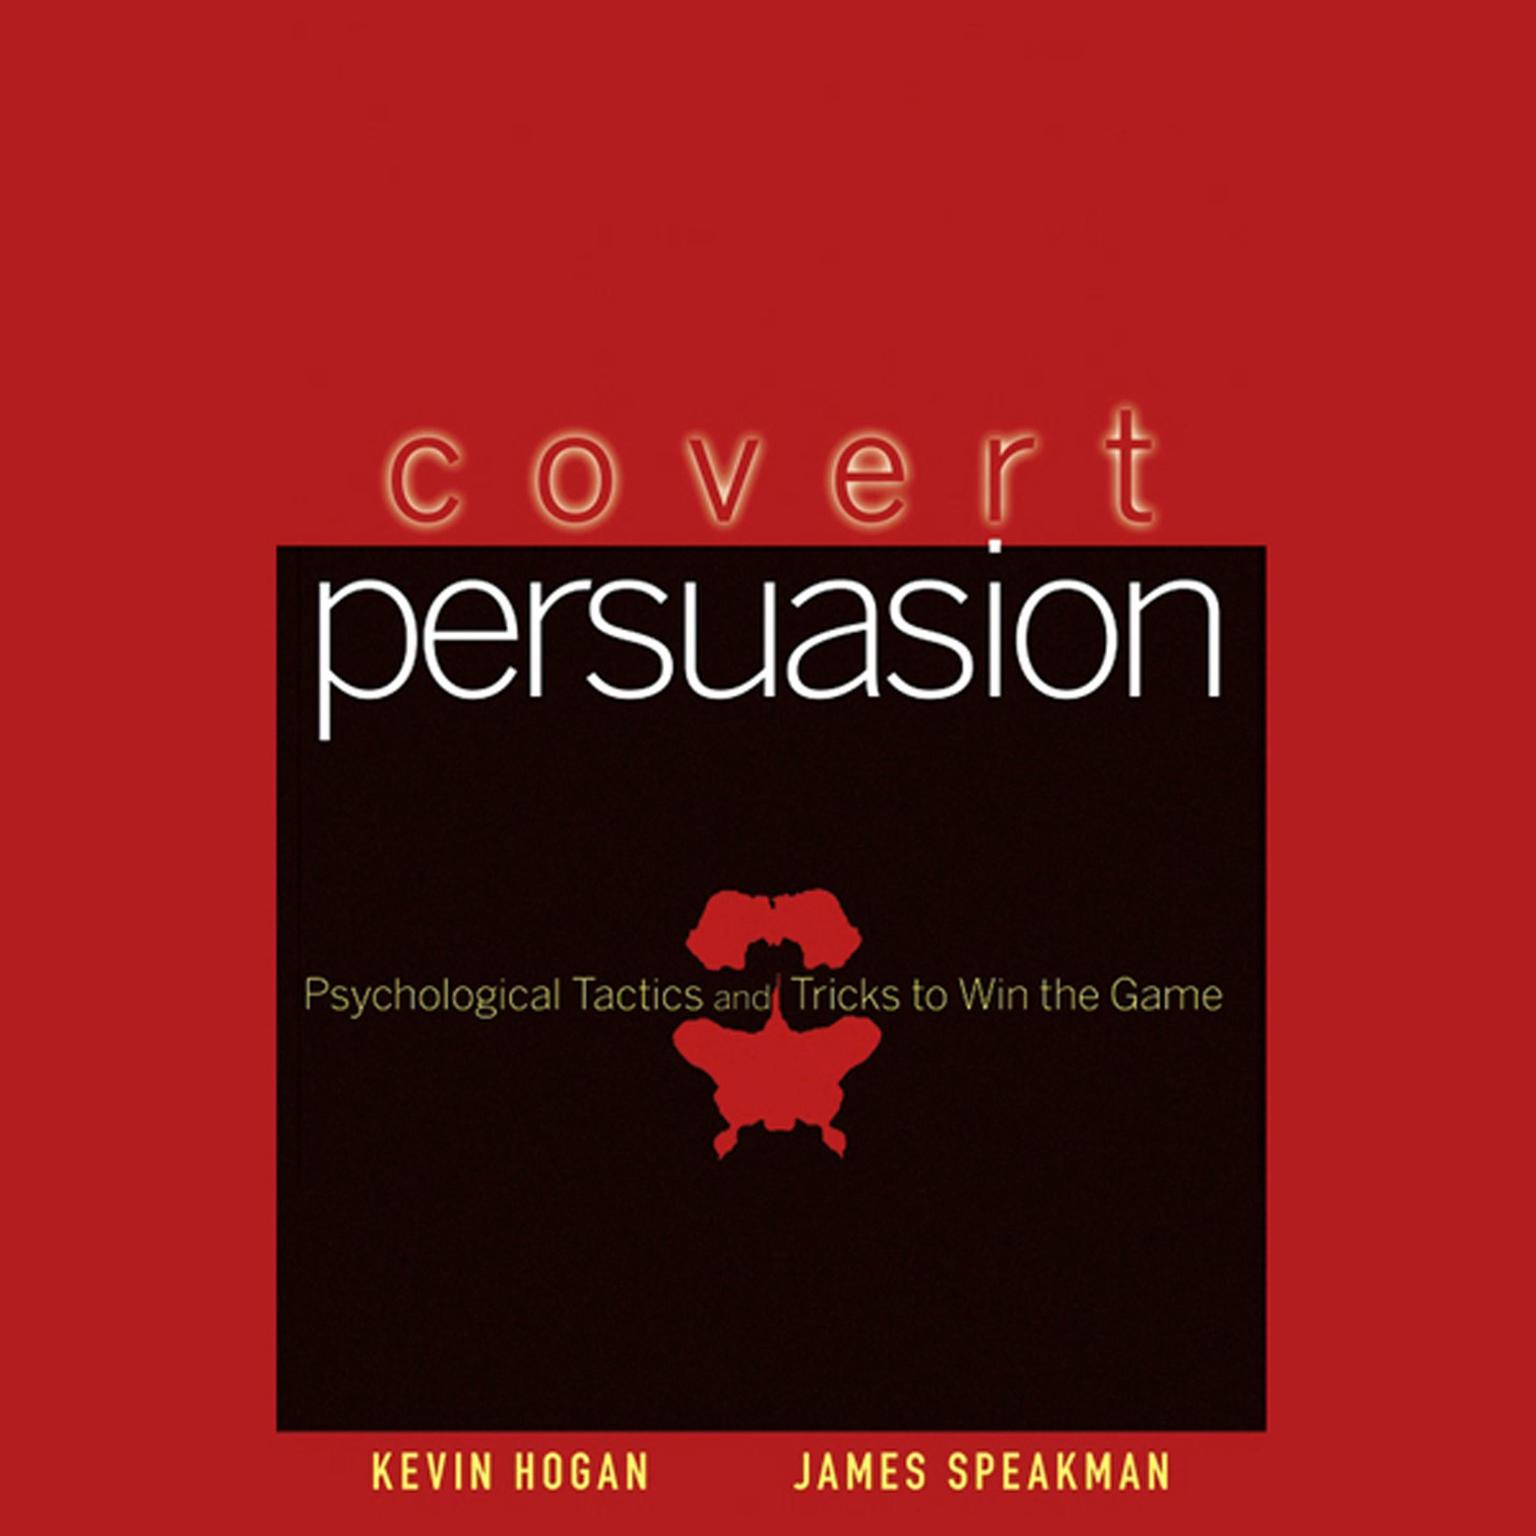 Covert Persuasion: Psychological Tactics and Tricks to Win the Game Audiobook, by James Speakman